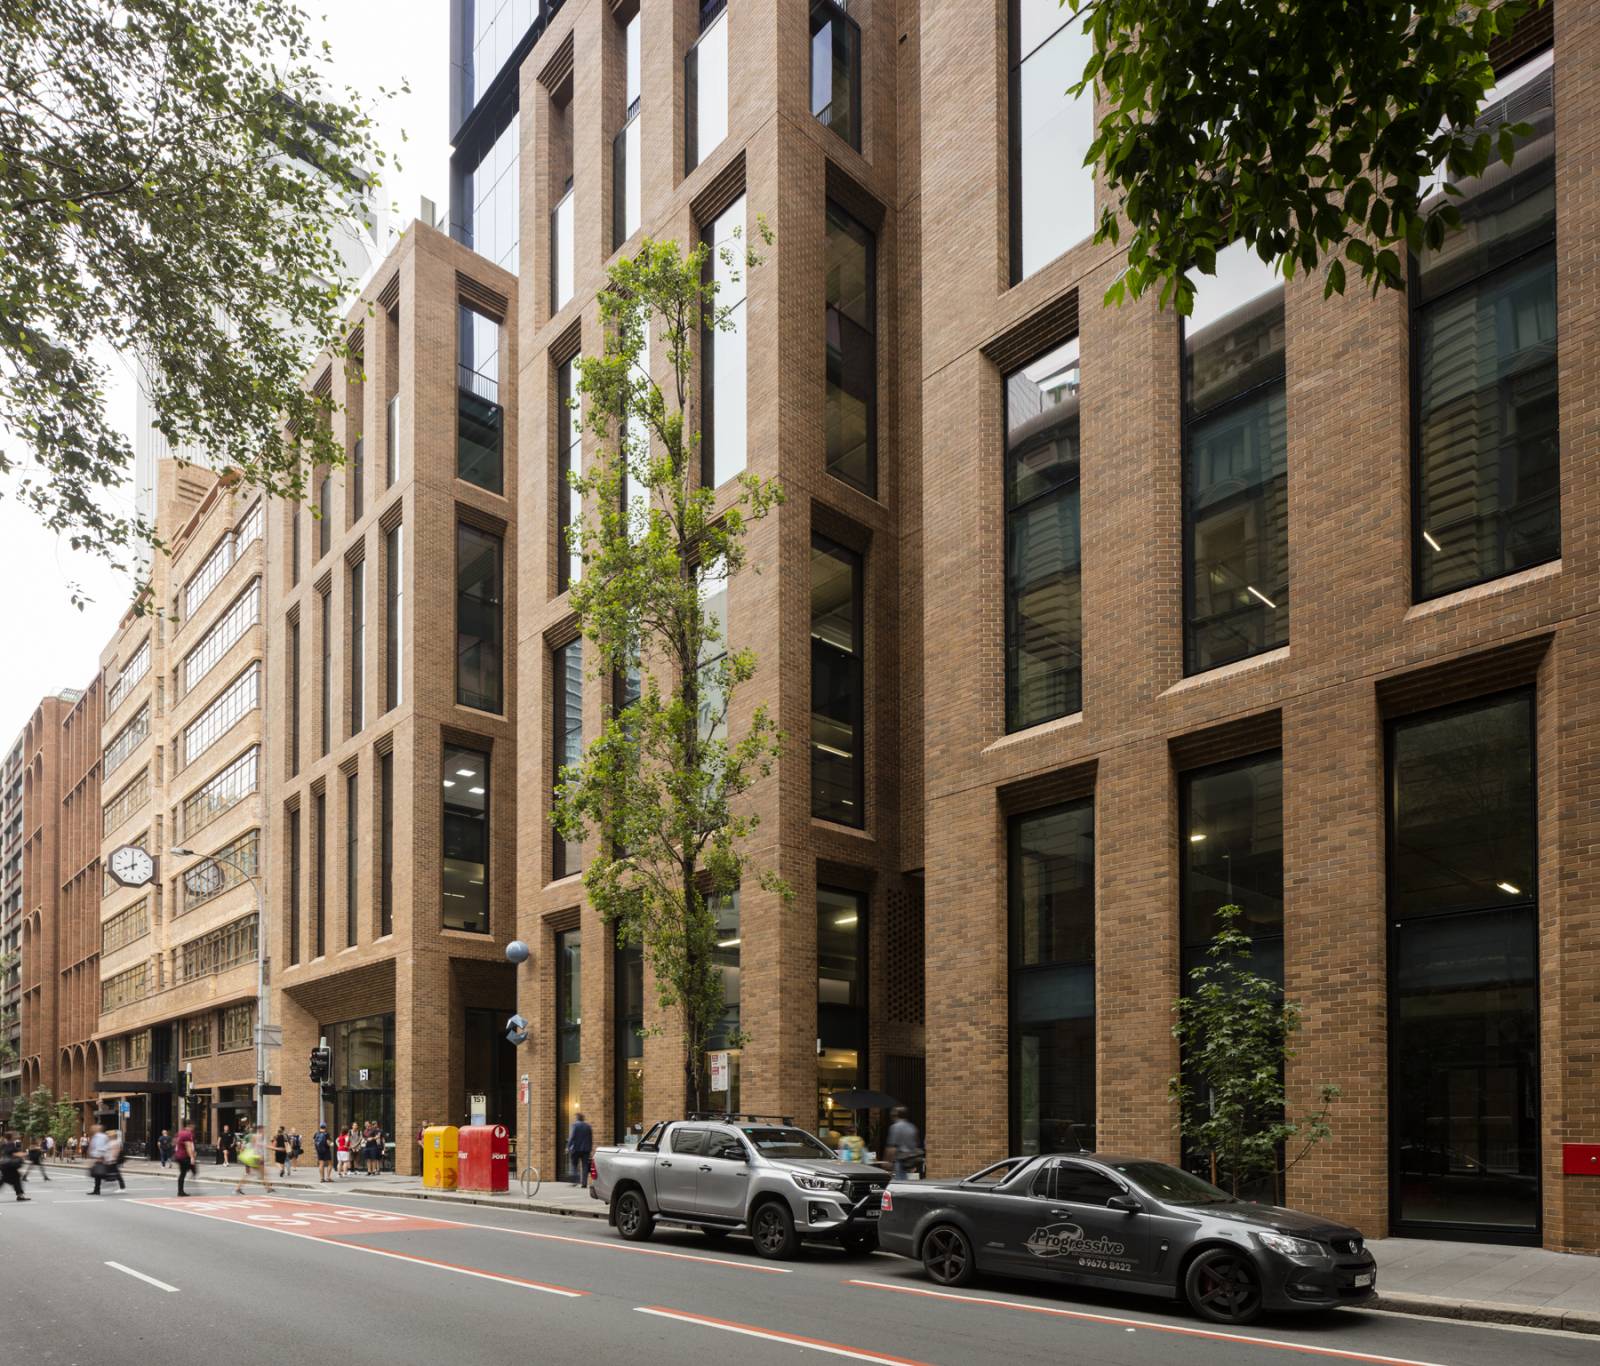 Connecting cities through designing activated ground planes - Barrack Place facade